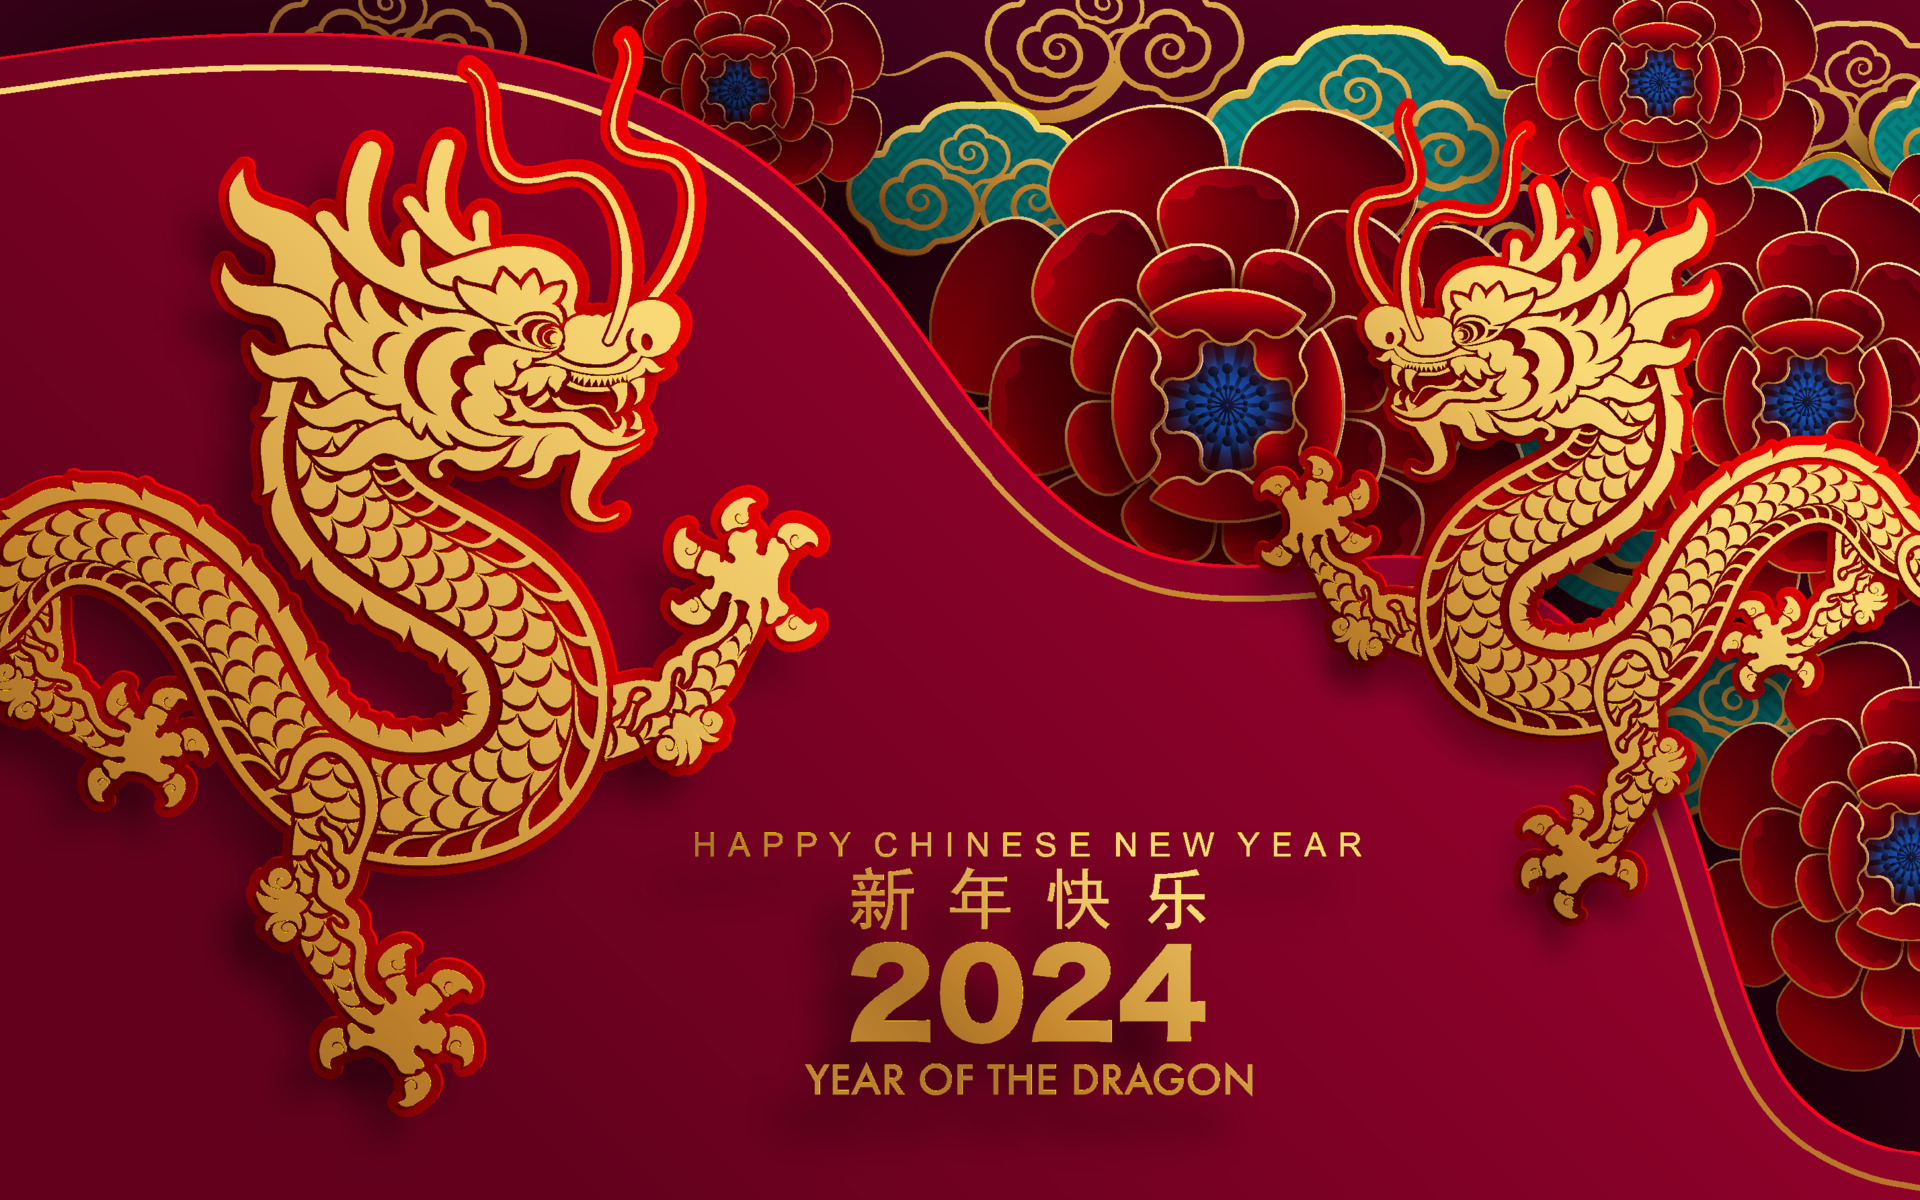 happy-chinese-new-year-2024-the-dragon-zodiac-sign-vector-1698125453.jpg